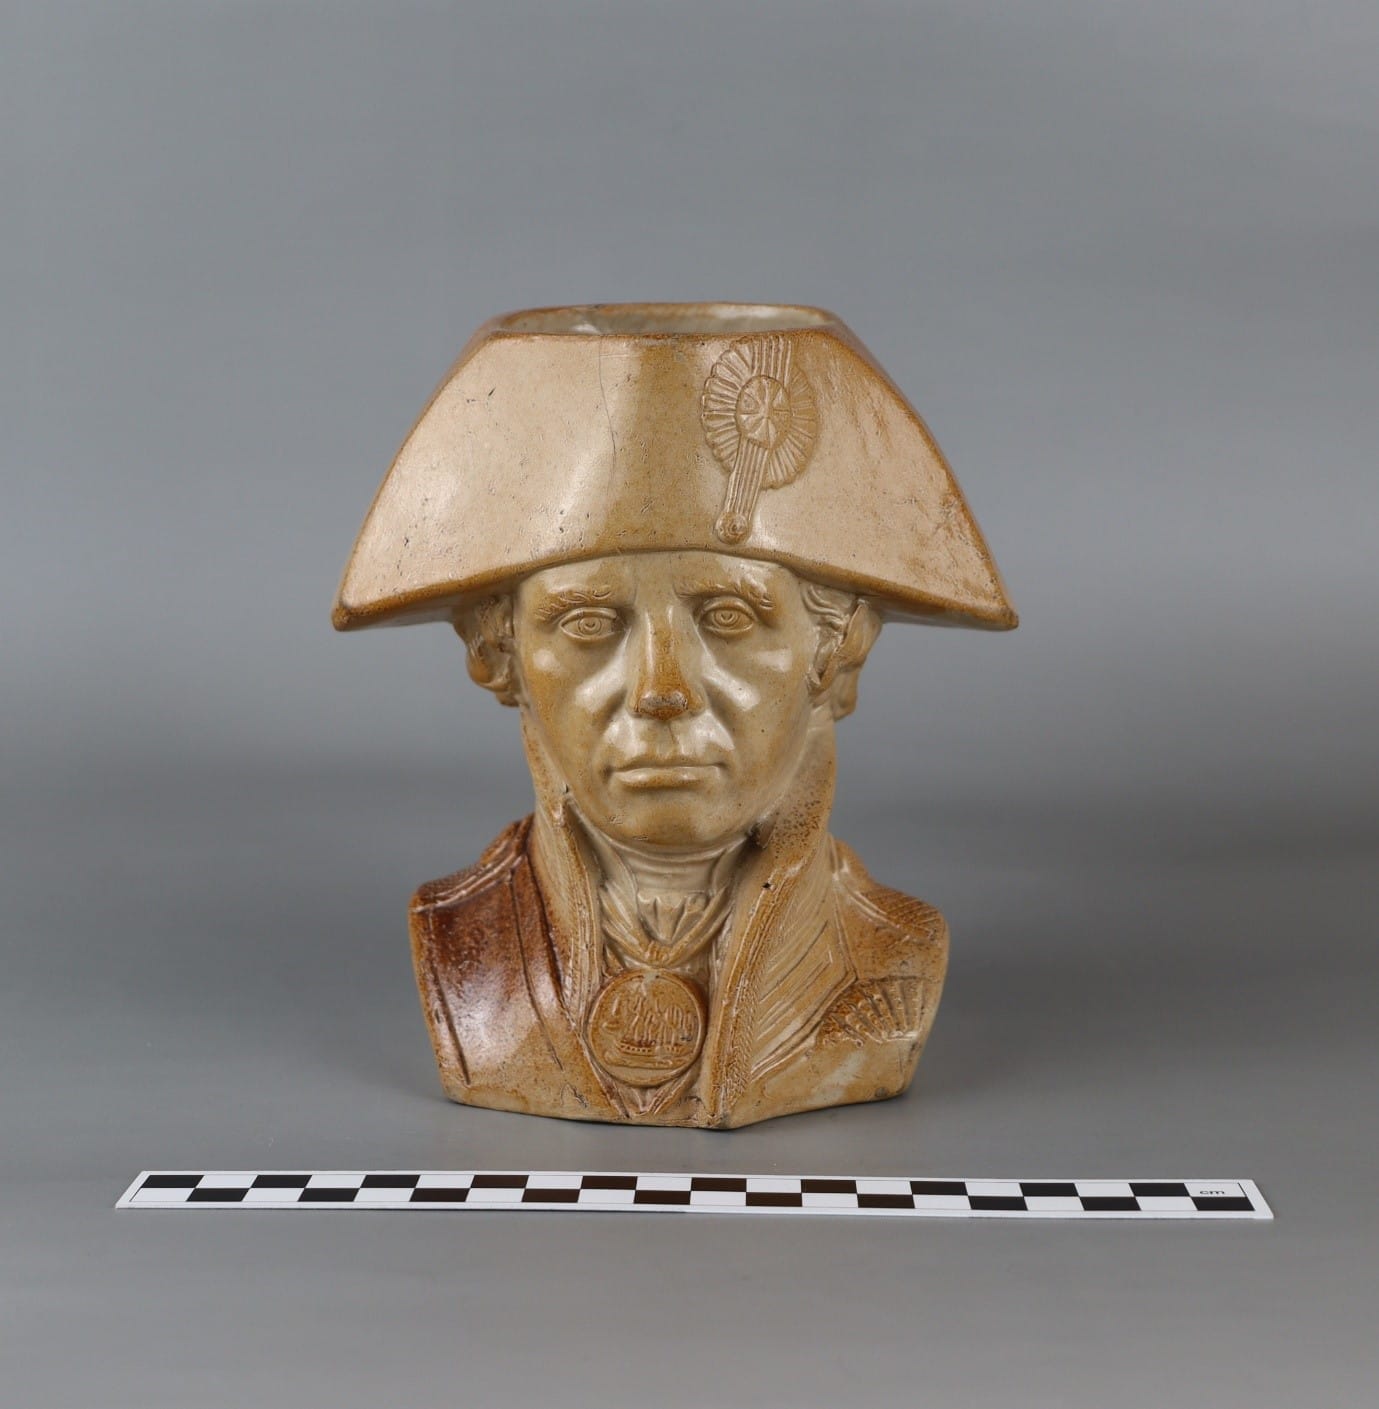 A statue of a person in a hat

Description automatically generated